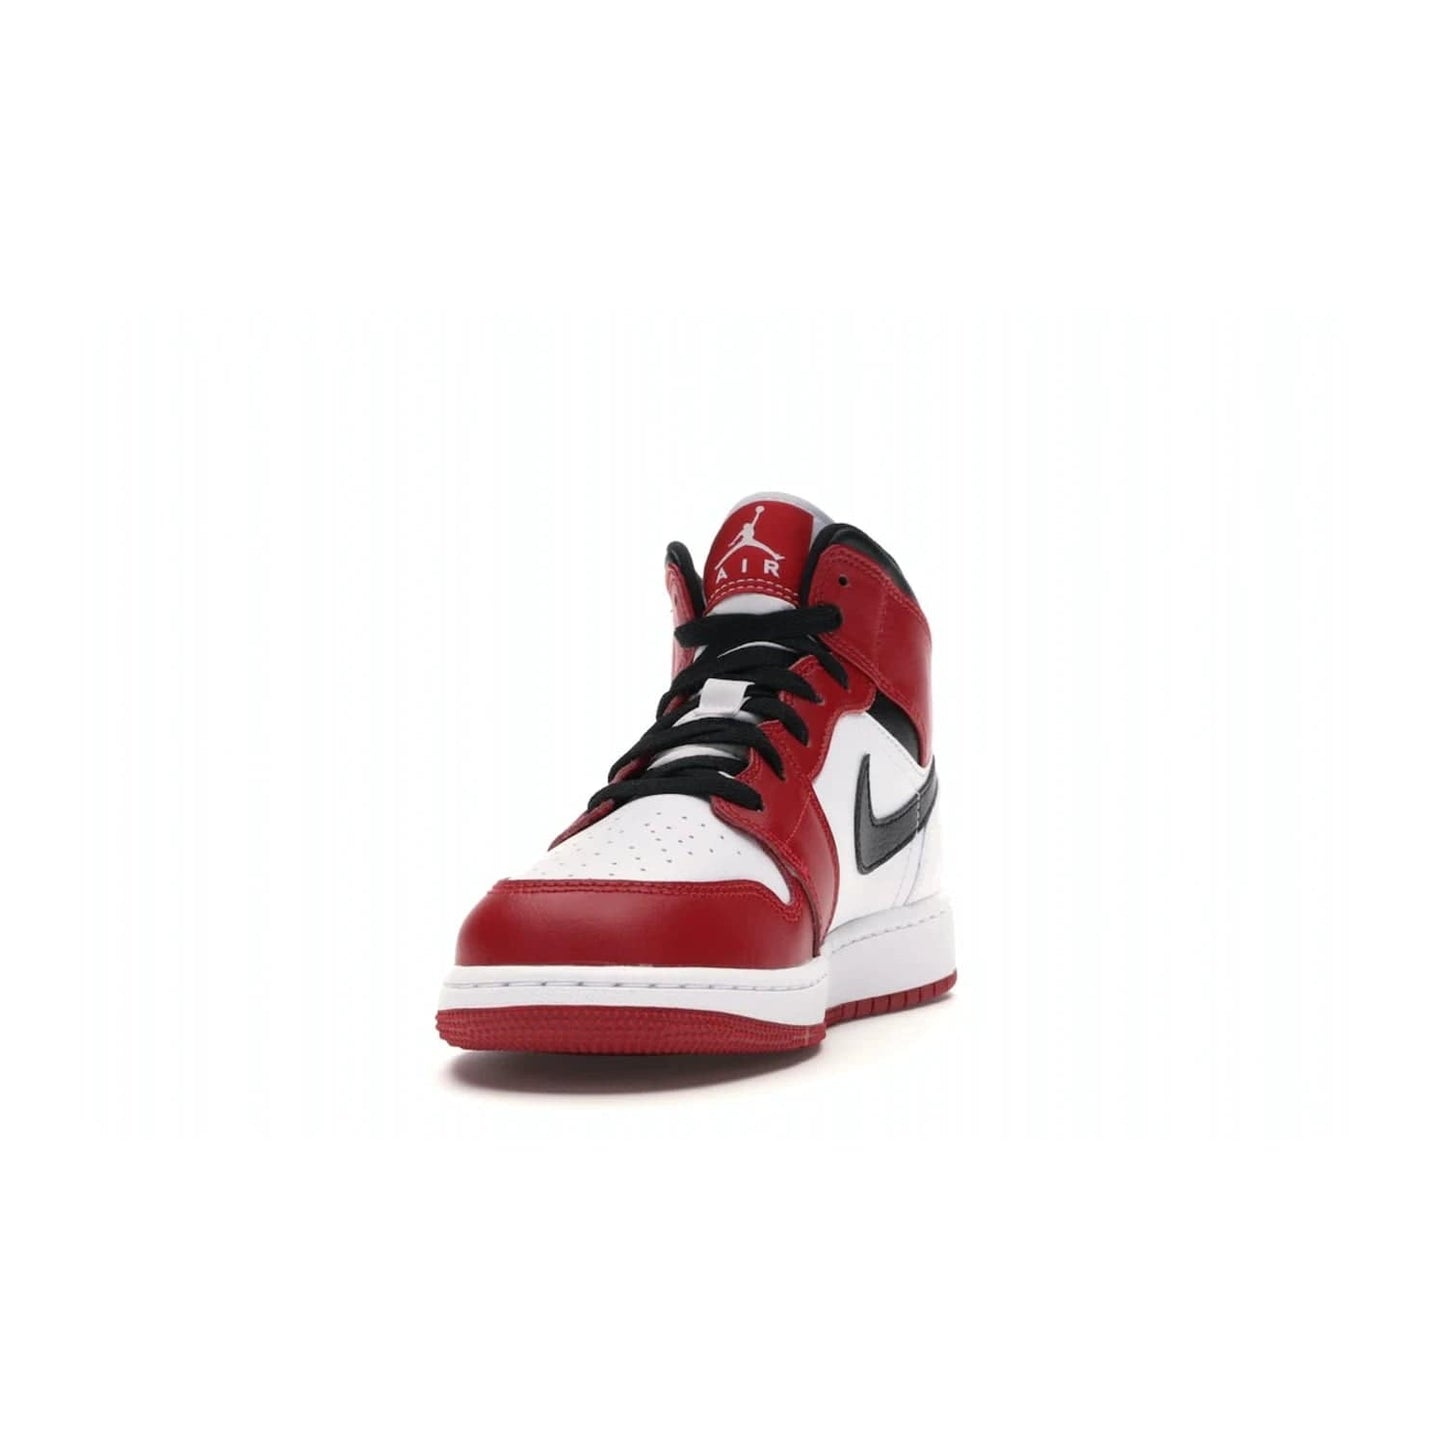 Jordan 1 Mid Chicago (2020) (GS) - Image 12 - Only at www.BallersClubKickz.com - The Kids Air Jordan 1 Mid Chicago 2020 is a stylish sneaker with classic Jordan features. White, red and black color scheme with iconic Wings and Swoosh logos, padded ankle support, white midsole with Air tech and black cotton laces. Sure to become an instant classic. July 2020 release.